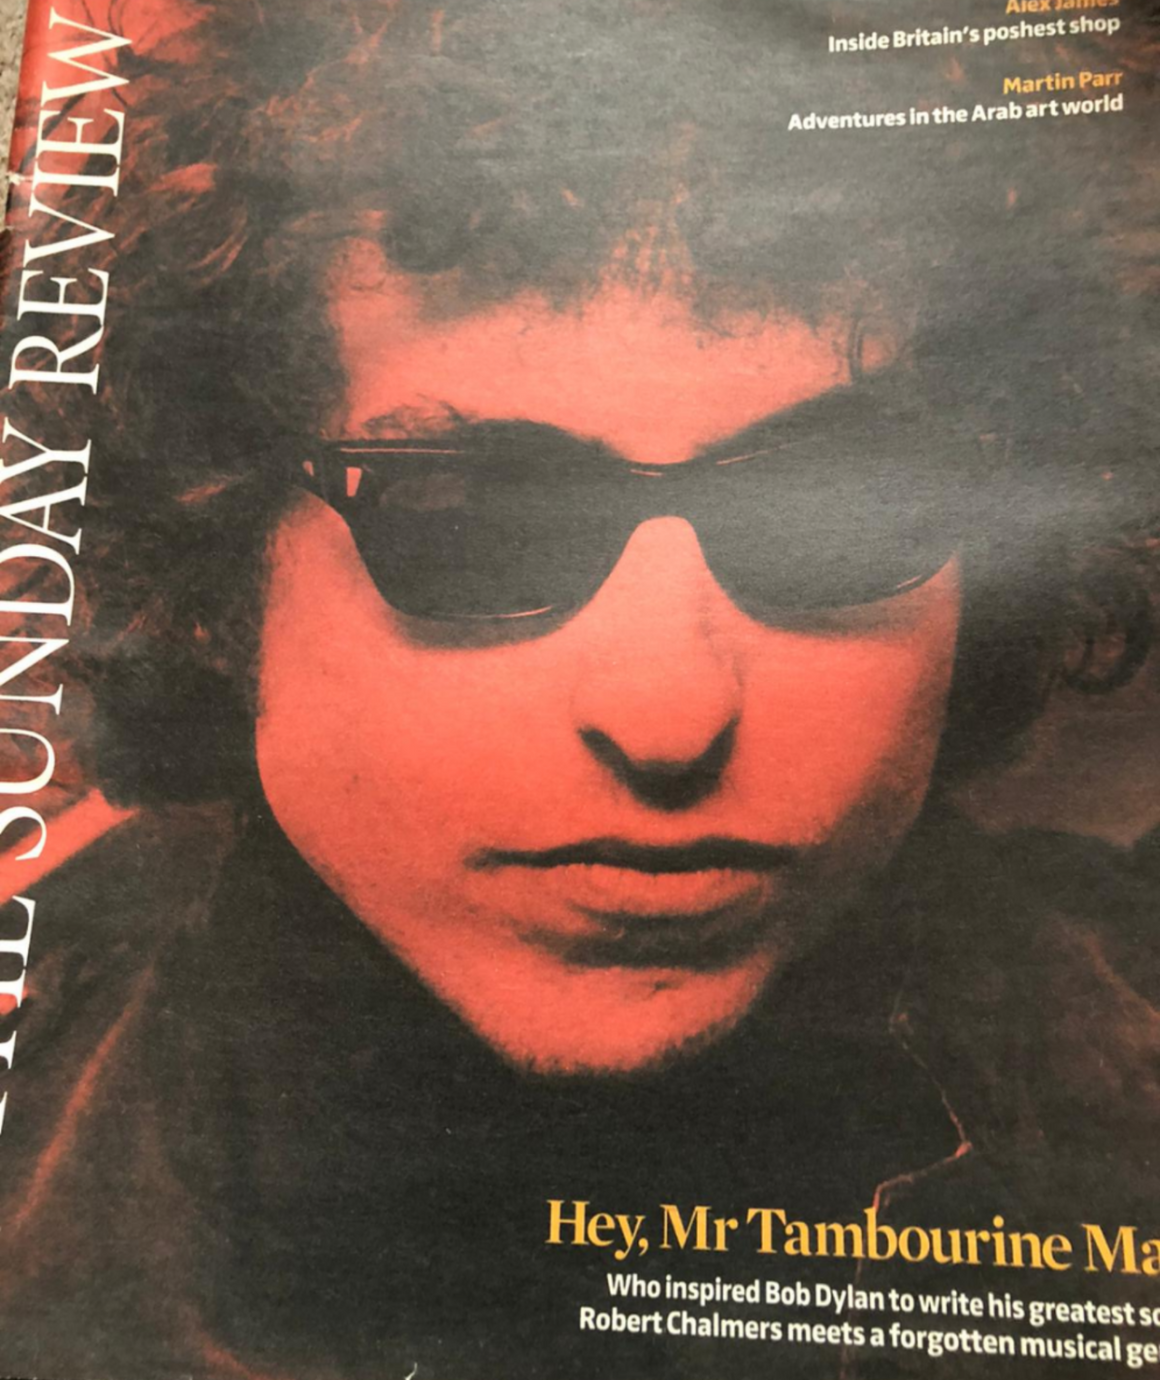 THE SUNDAY REVIEW Magazine BOB DYLAN COVER FEATURE